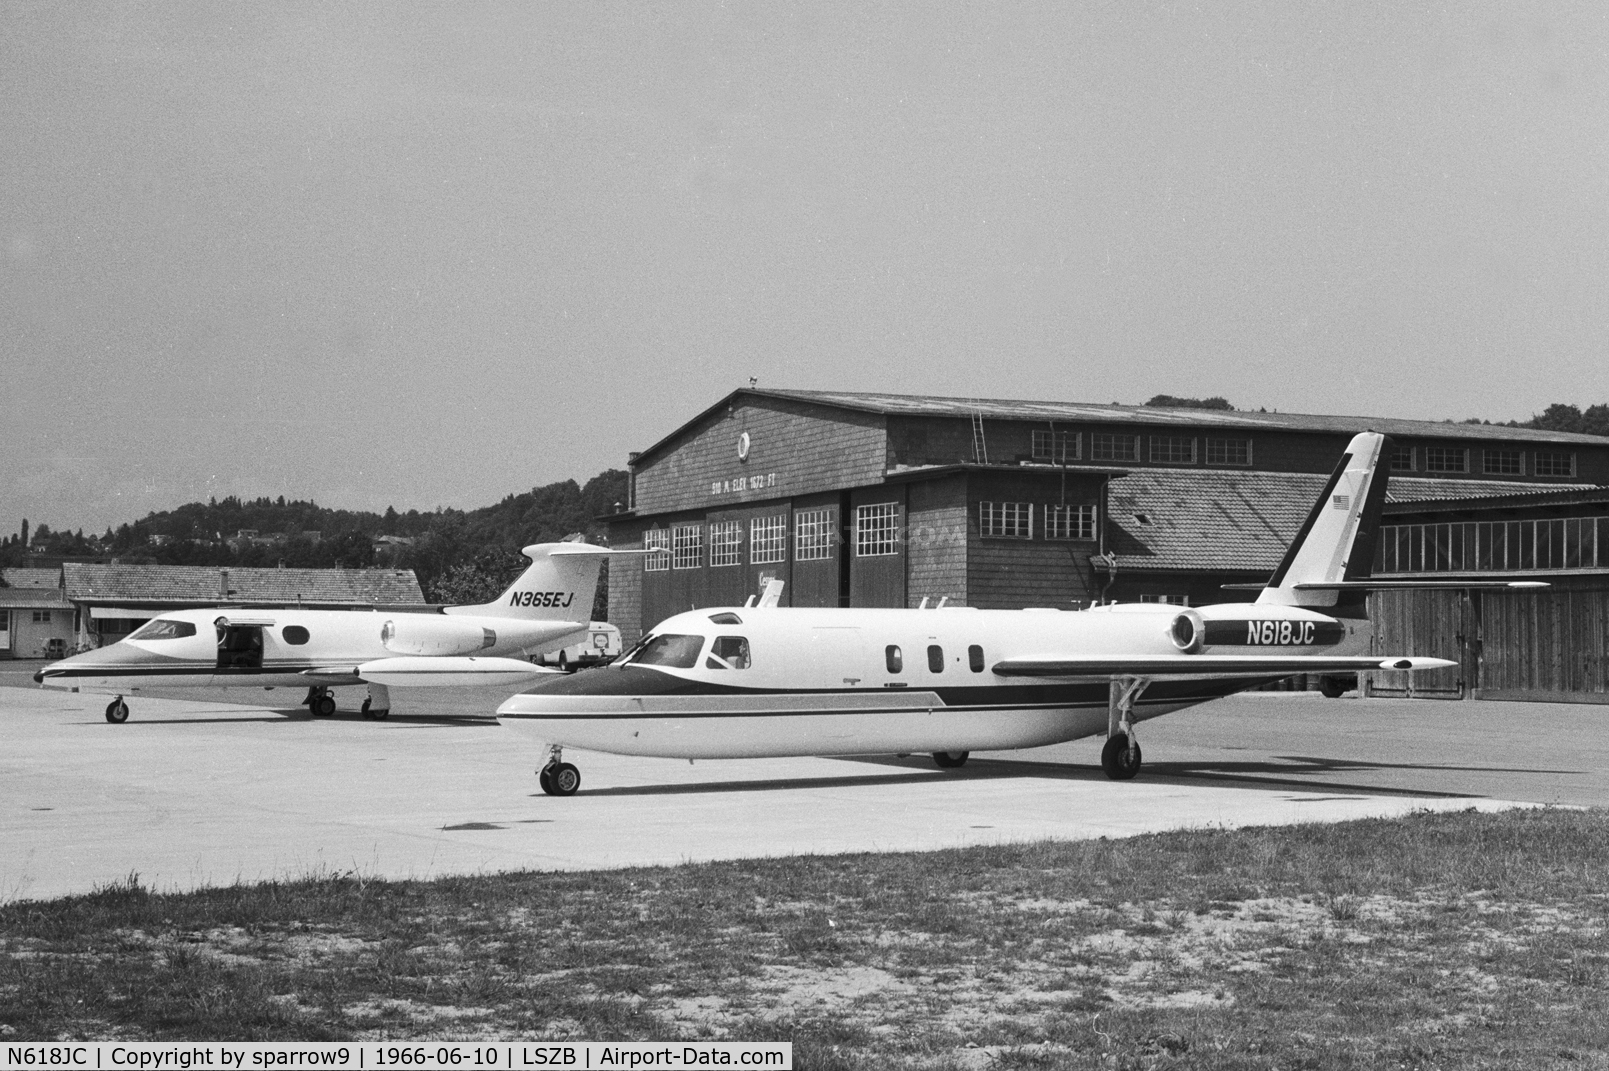 N618JC, 1966 Aero Commander 1121 Jet Commander C/N 51, At an airshow at Berne. Demonstrator aircraft. Had a lot of different registrations before beeing scrapped.
In front of Learjet 23 N365EJ.
Scanned from a b/w-negative.